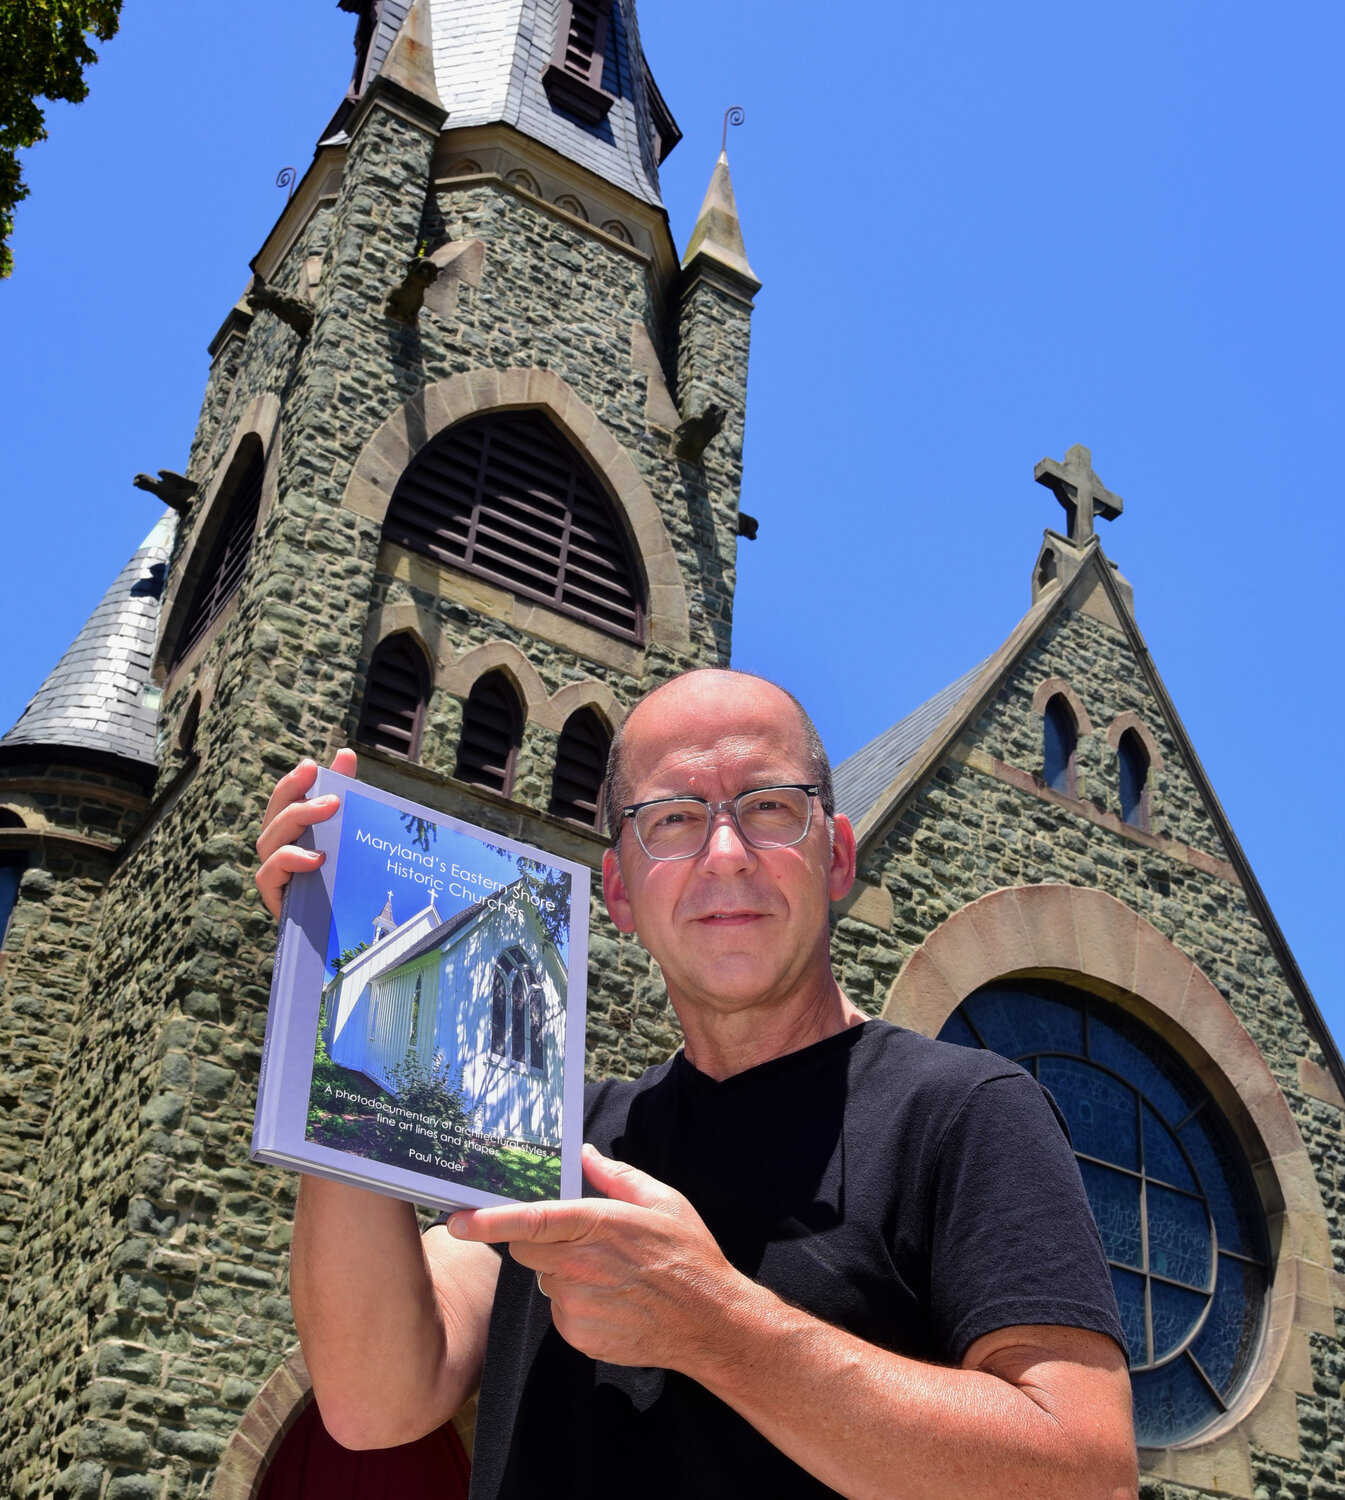 Photographer Paul Yoder has put his top choices of architectural styles of God’s houses in his just-released book,“ Maryland’s Eastern Shore Historic Churches.” The book showcases churches throughout the nine counties of the Eastern Shore.